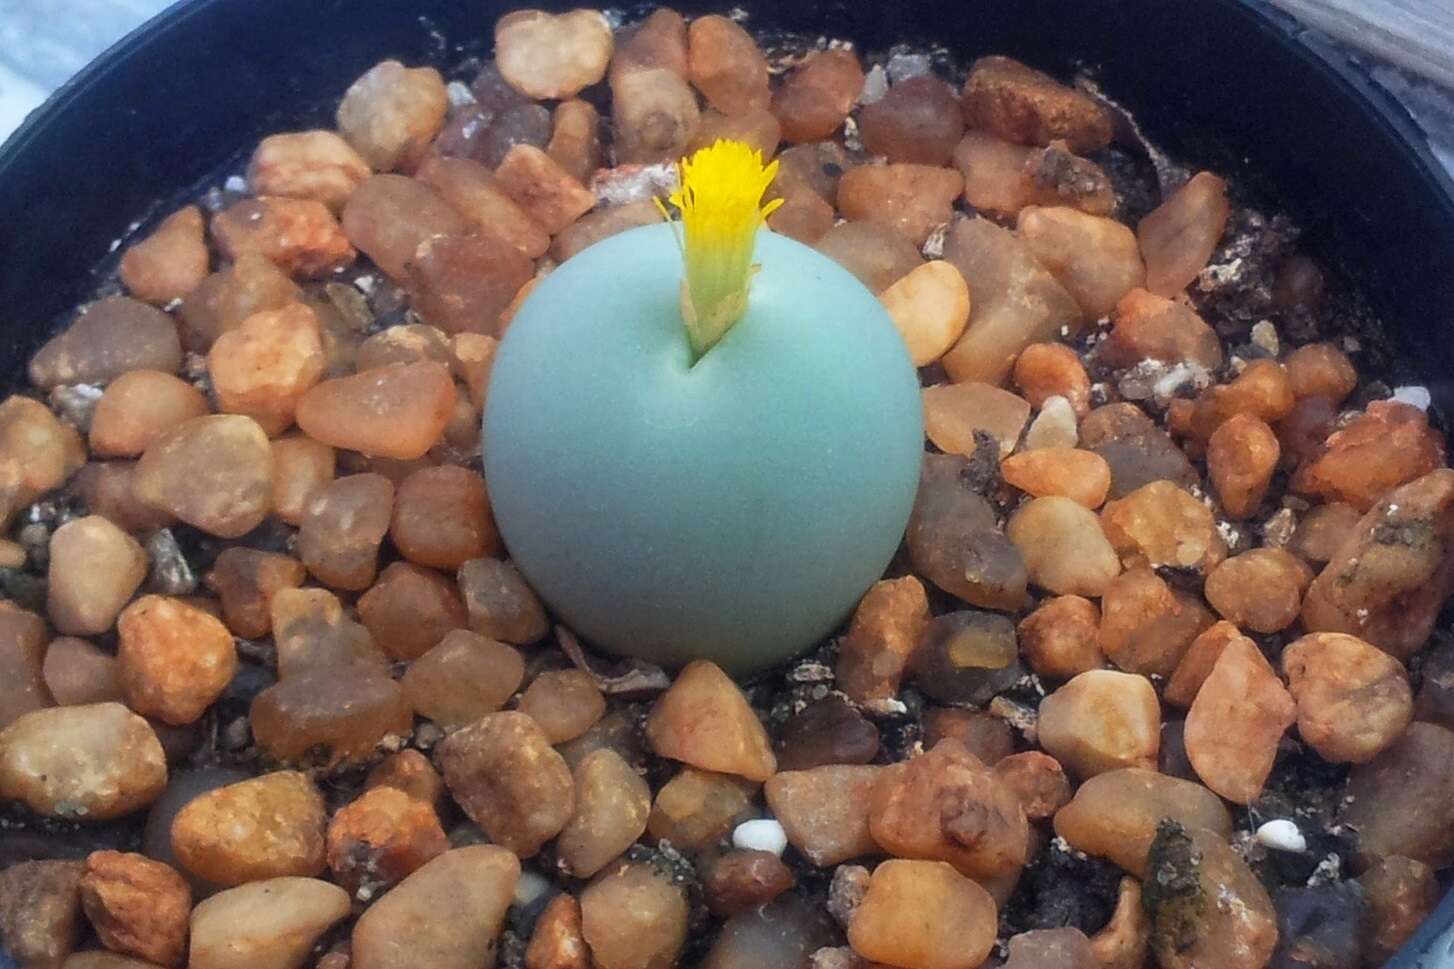 Image of Conophytum calculus (Berger) N. E. Br.